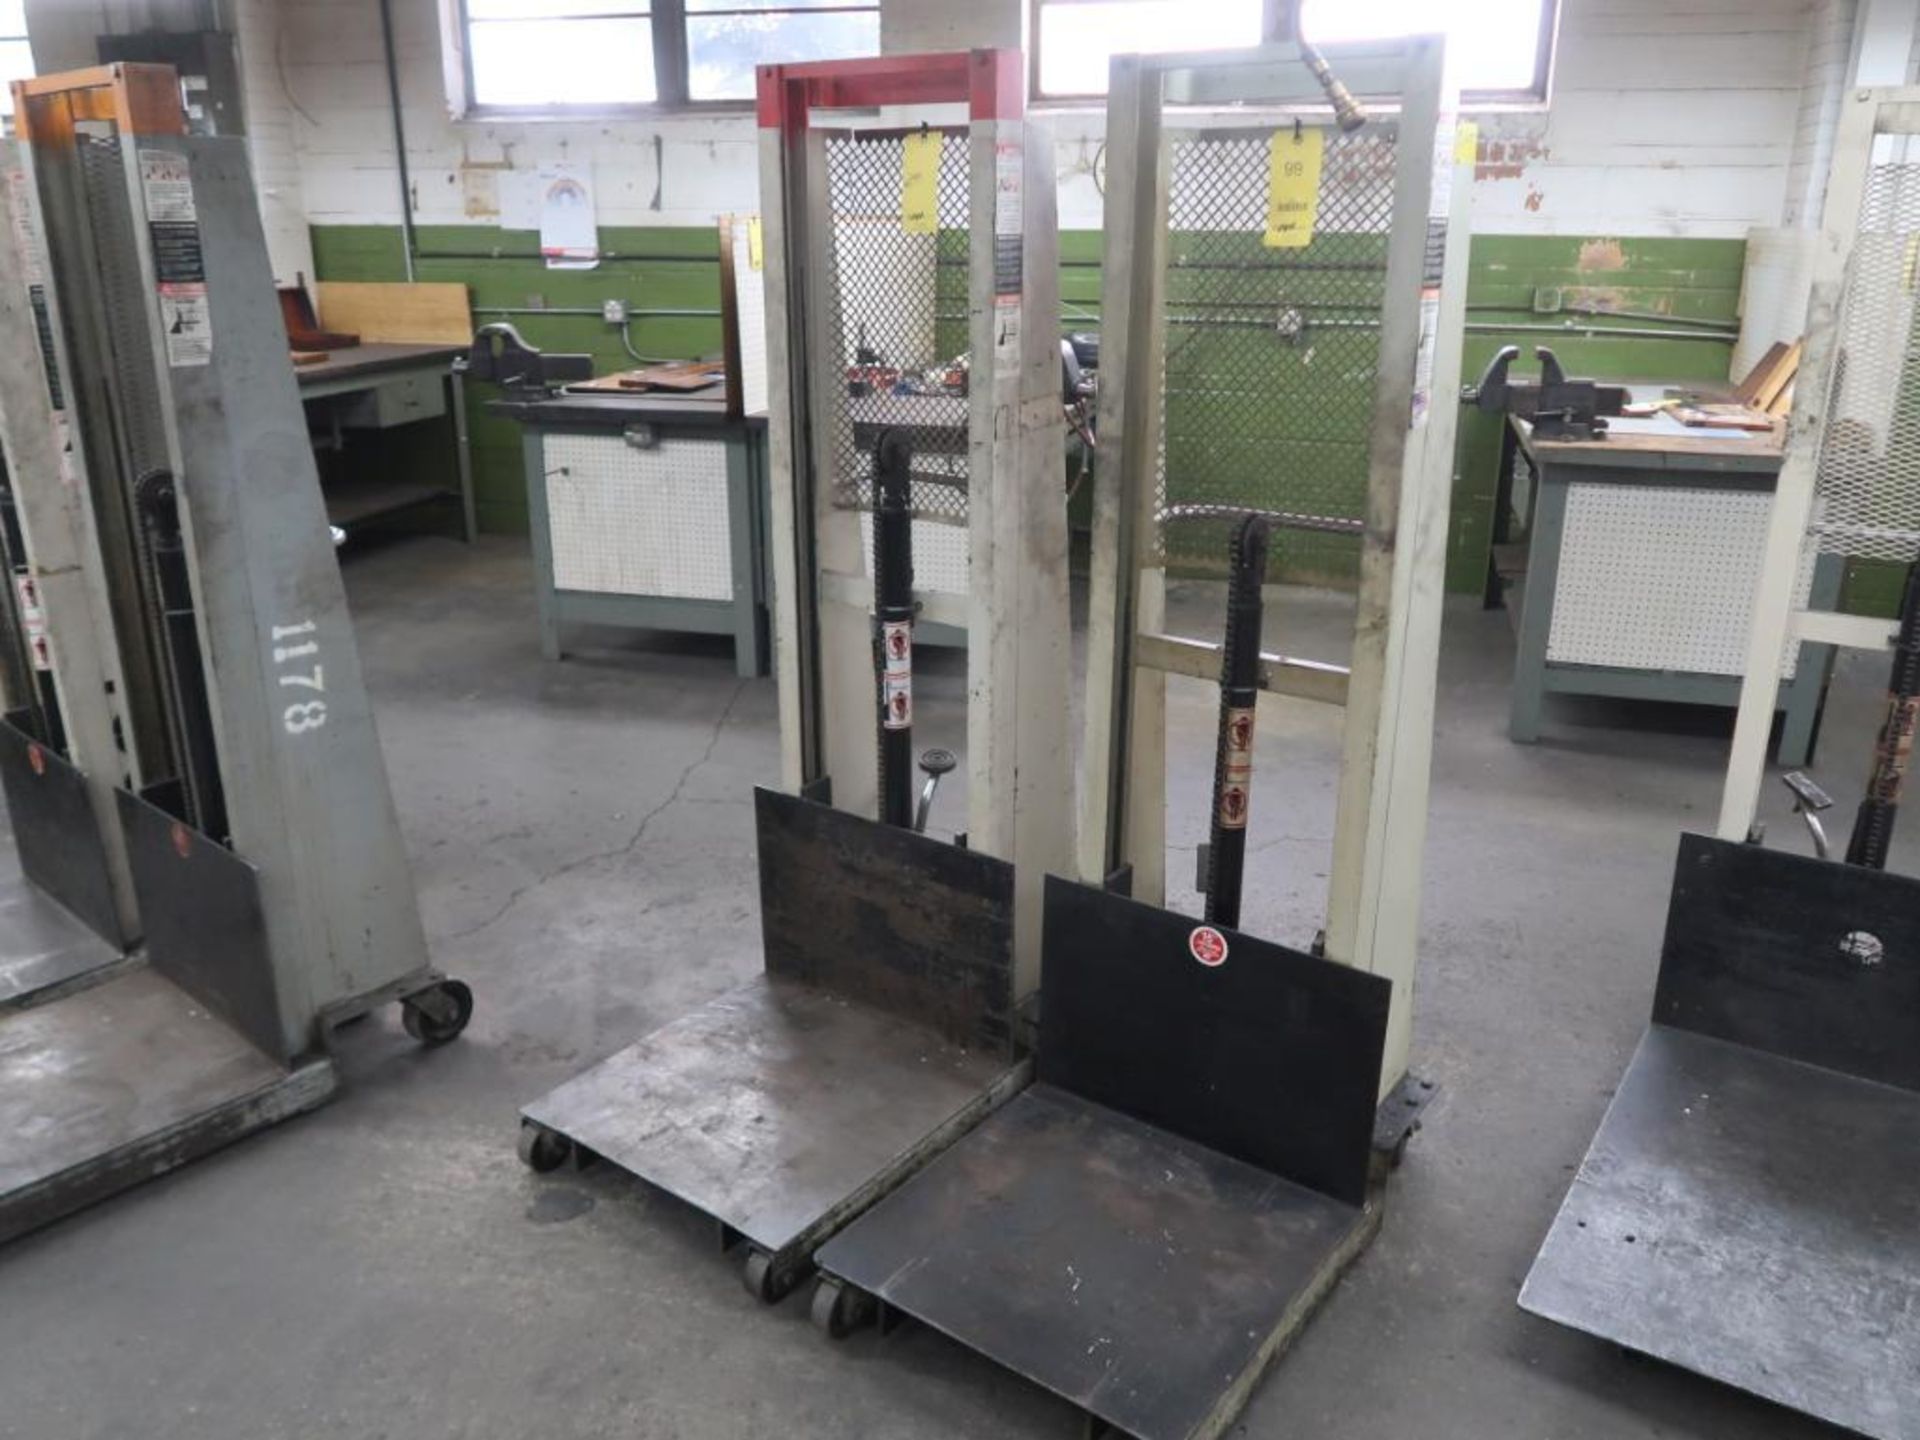 LOT: (2) 24 in. x 24 in. x 52 in. Hydraulic Die Carts, LOCATION: TOOL ROOM